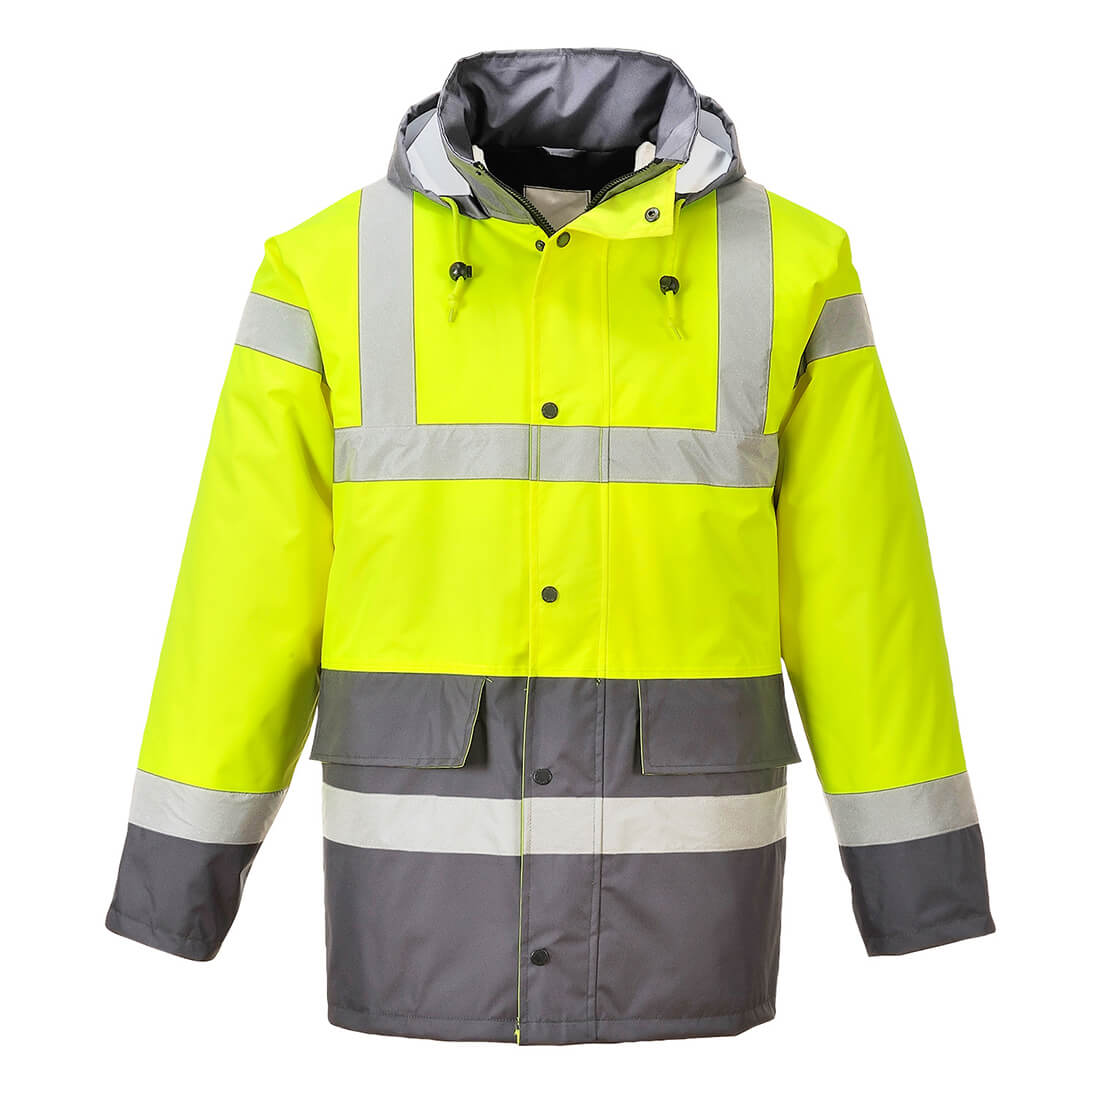 Image of Oxford Weave 300D Class 3 Hi Vis Contrast Traffic Jacket Yellow / Grey XL